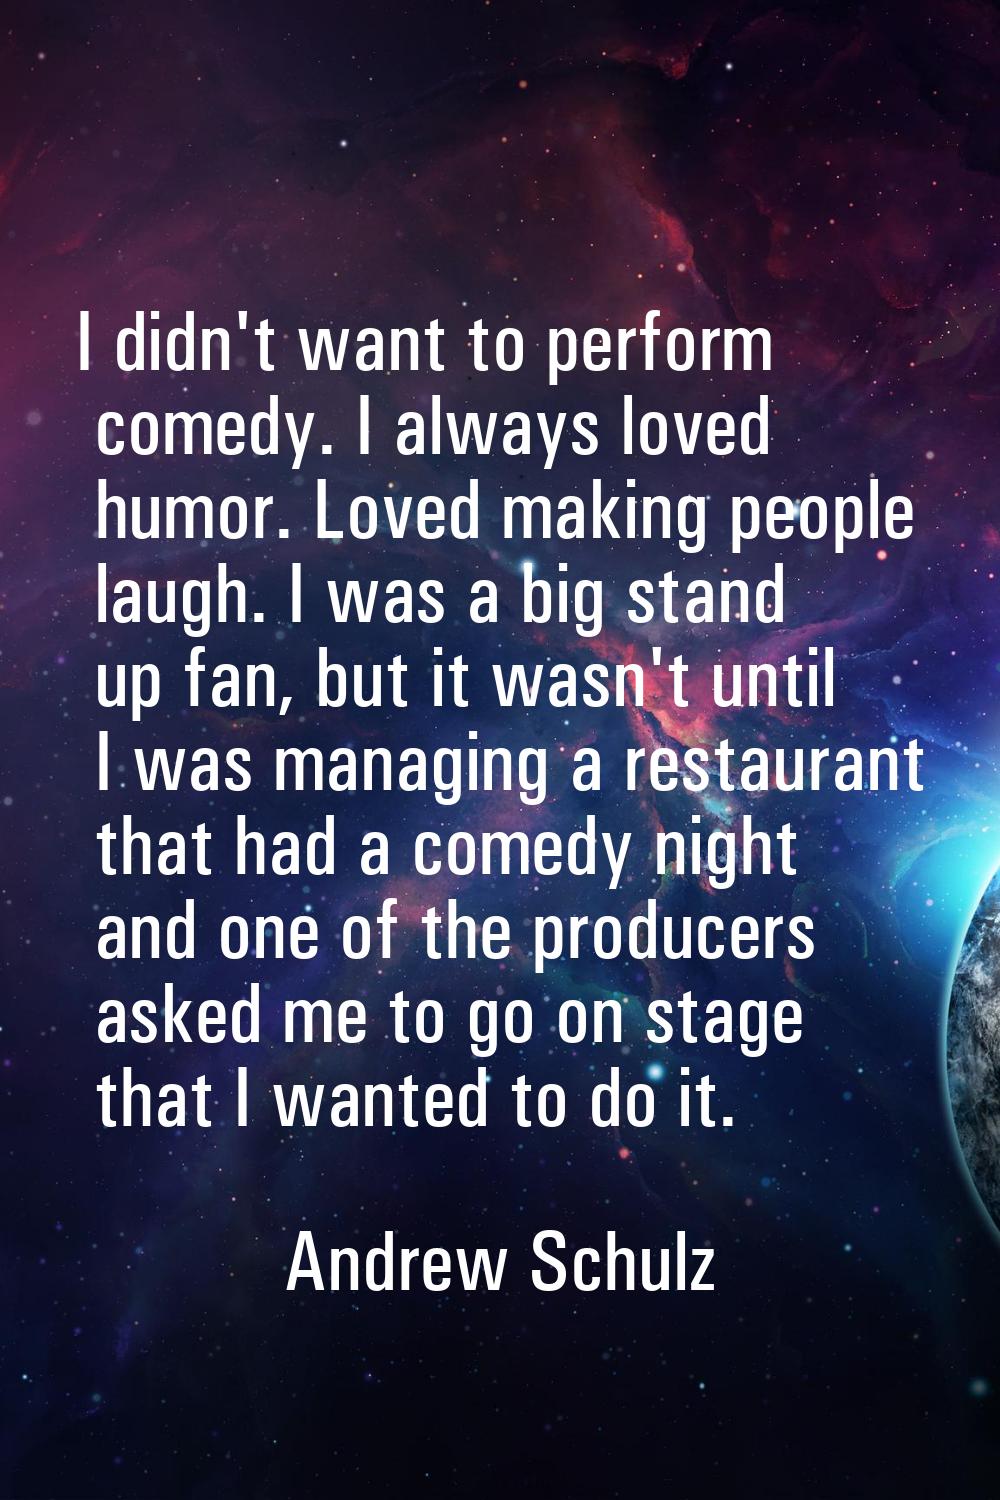 I didn't want to perform comedy. I always loved humor. Loved making people laugh. I was a big stand